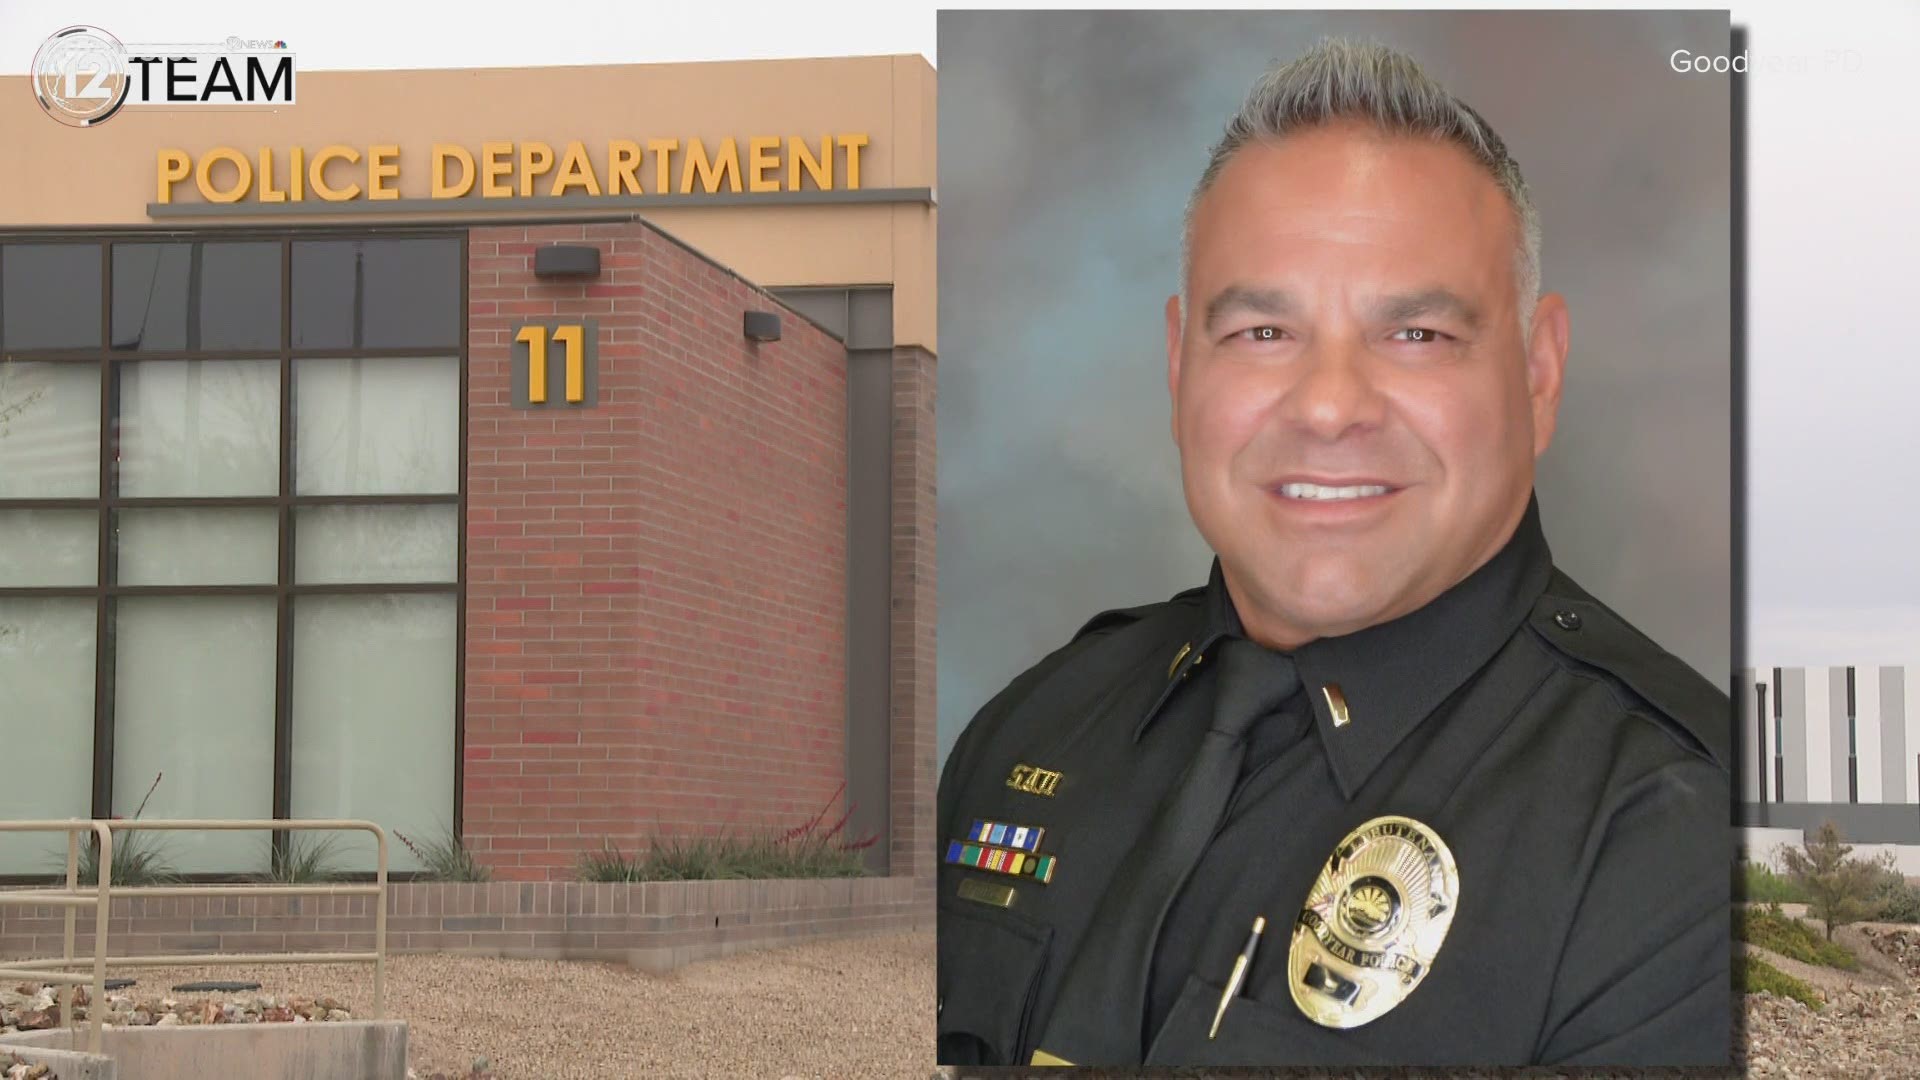 Former Goodyear police officer Lt. Joe Pacello was in charge of internal affairs investigations at Goodyear Police until he became the subject of an investigation.